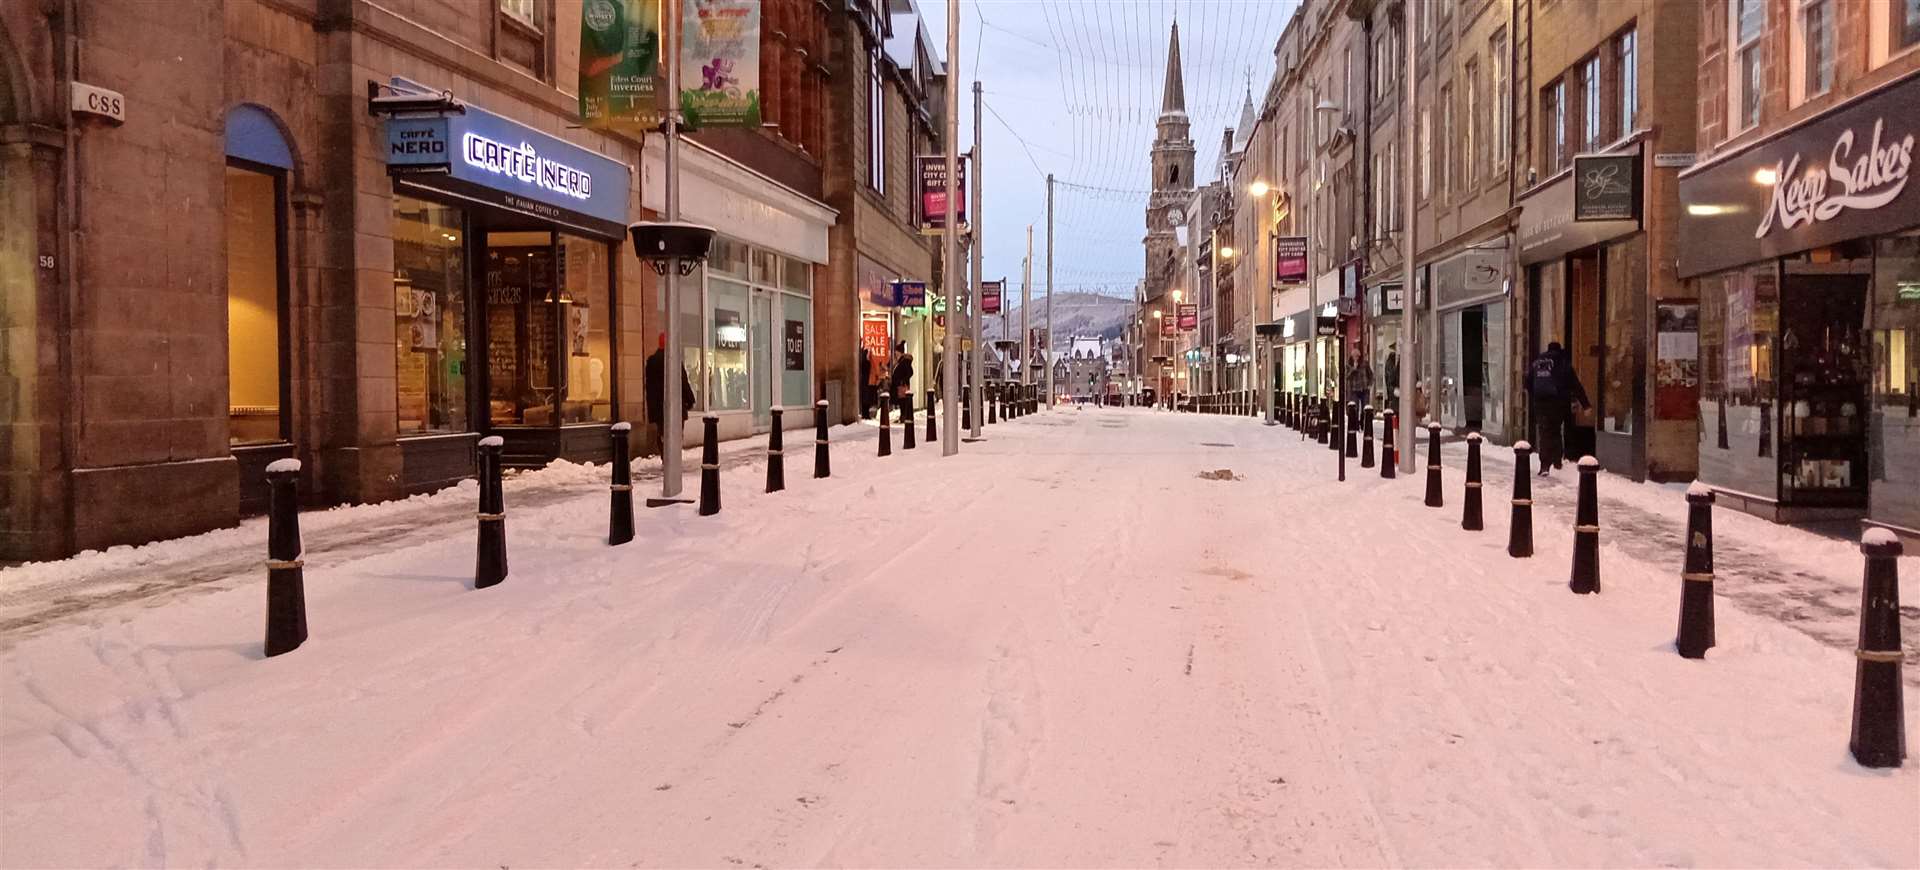 Inverness High Street in the snow.